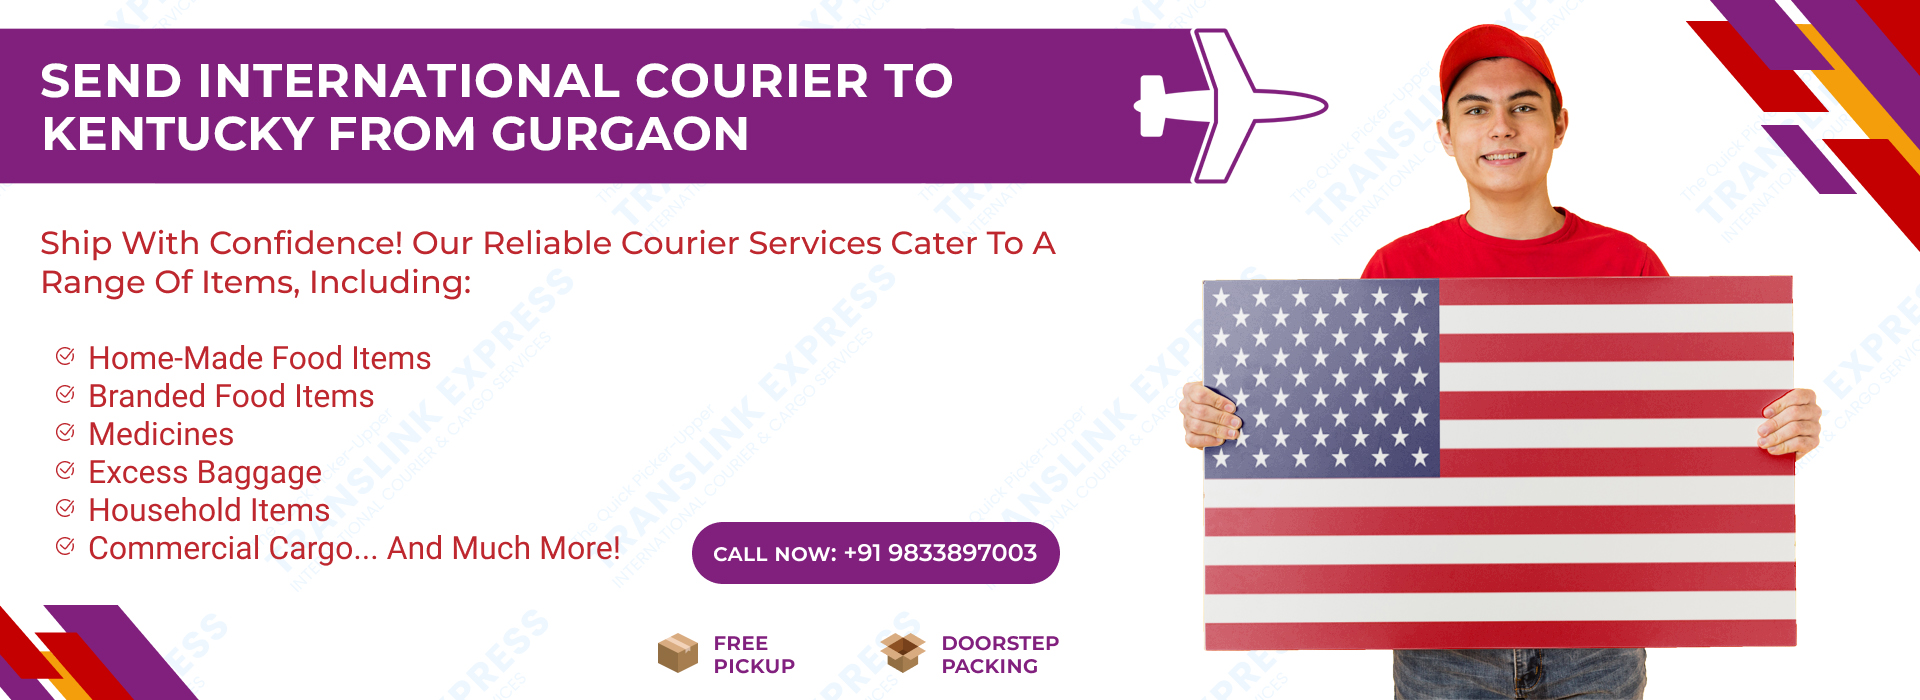 Courier to Kentucky From Gurgaon